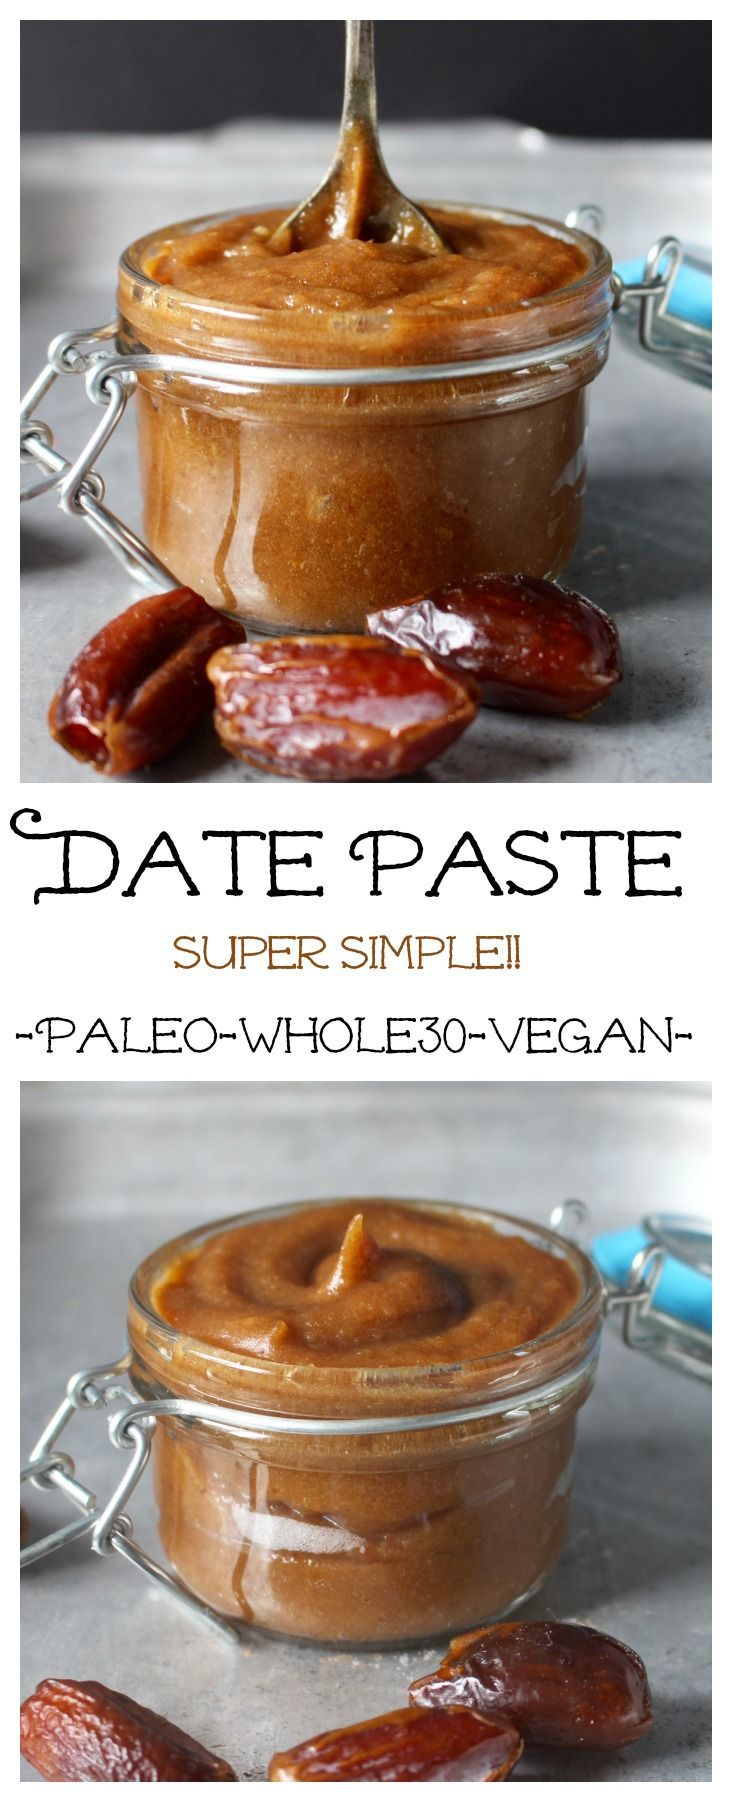 Date Paste (Paleo, Whole30, Vegan)- so simple to make and so delicious! 2 easy steps!